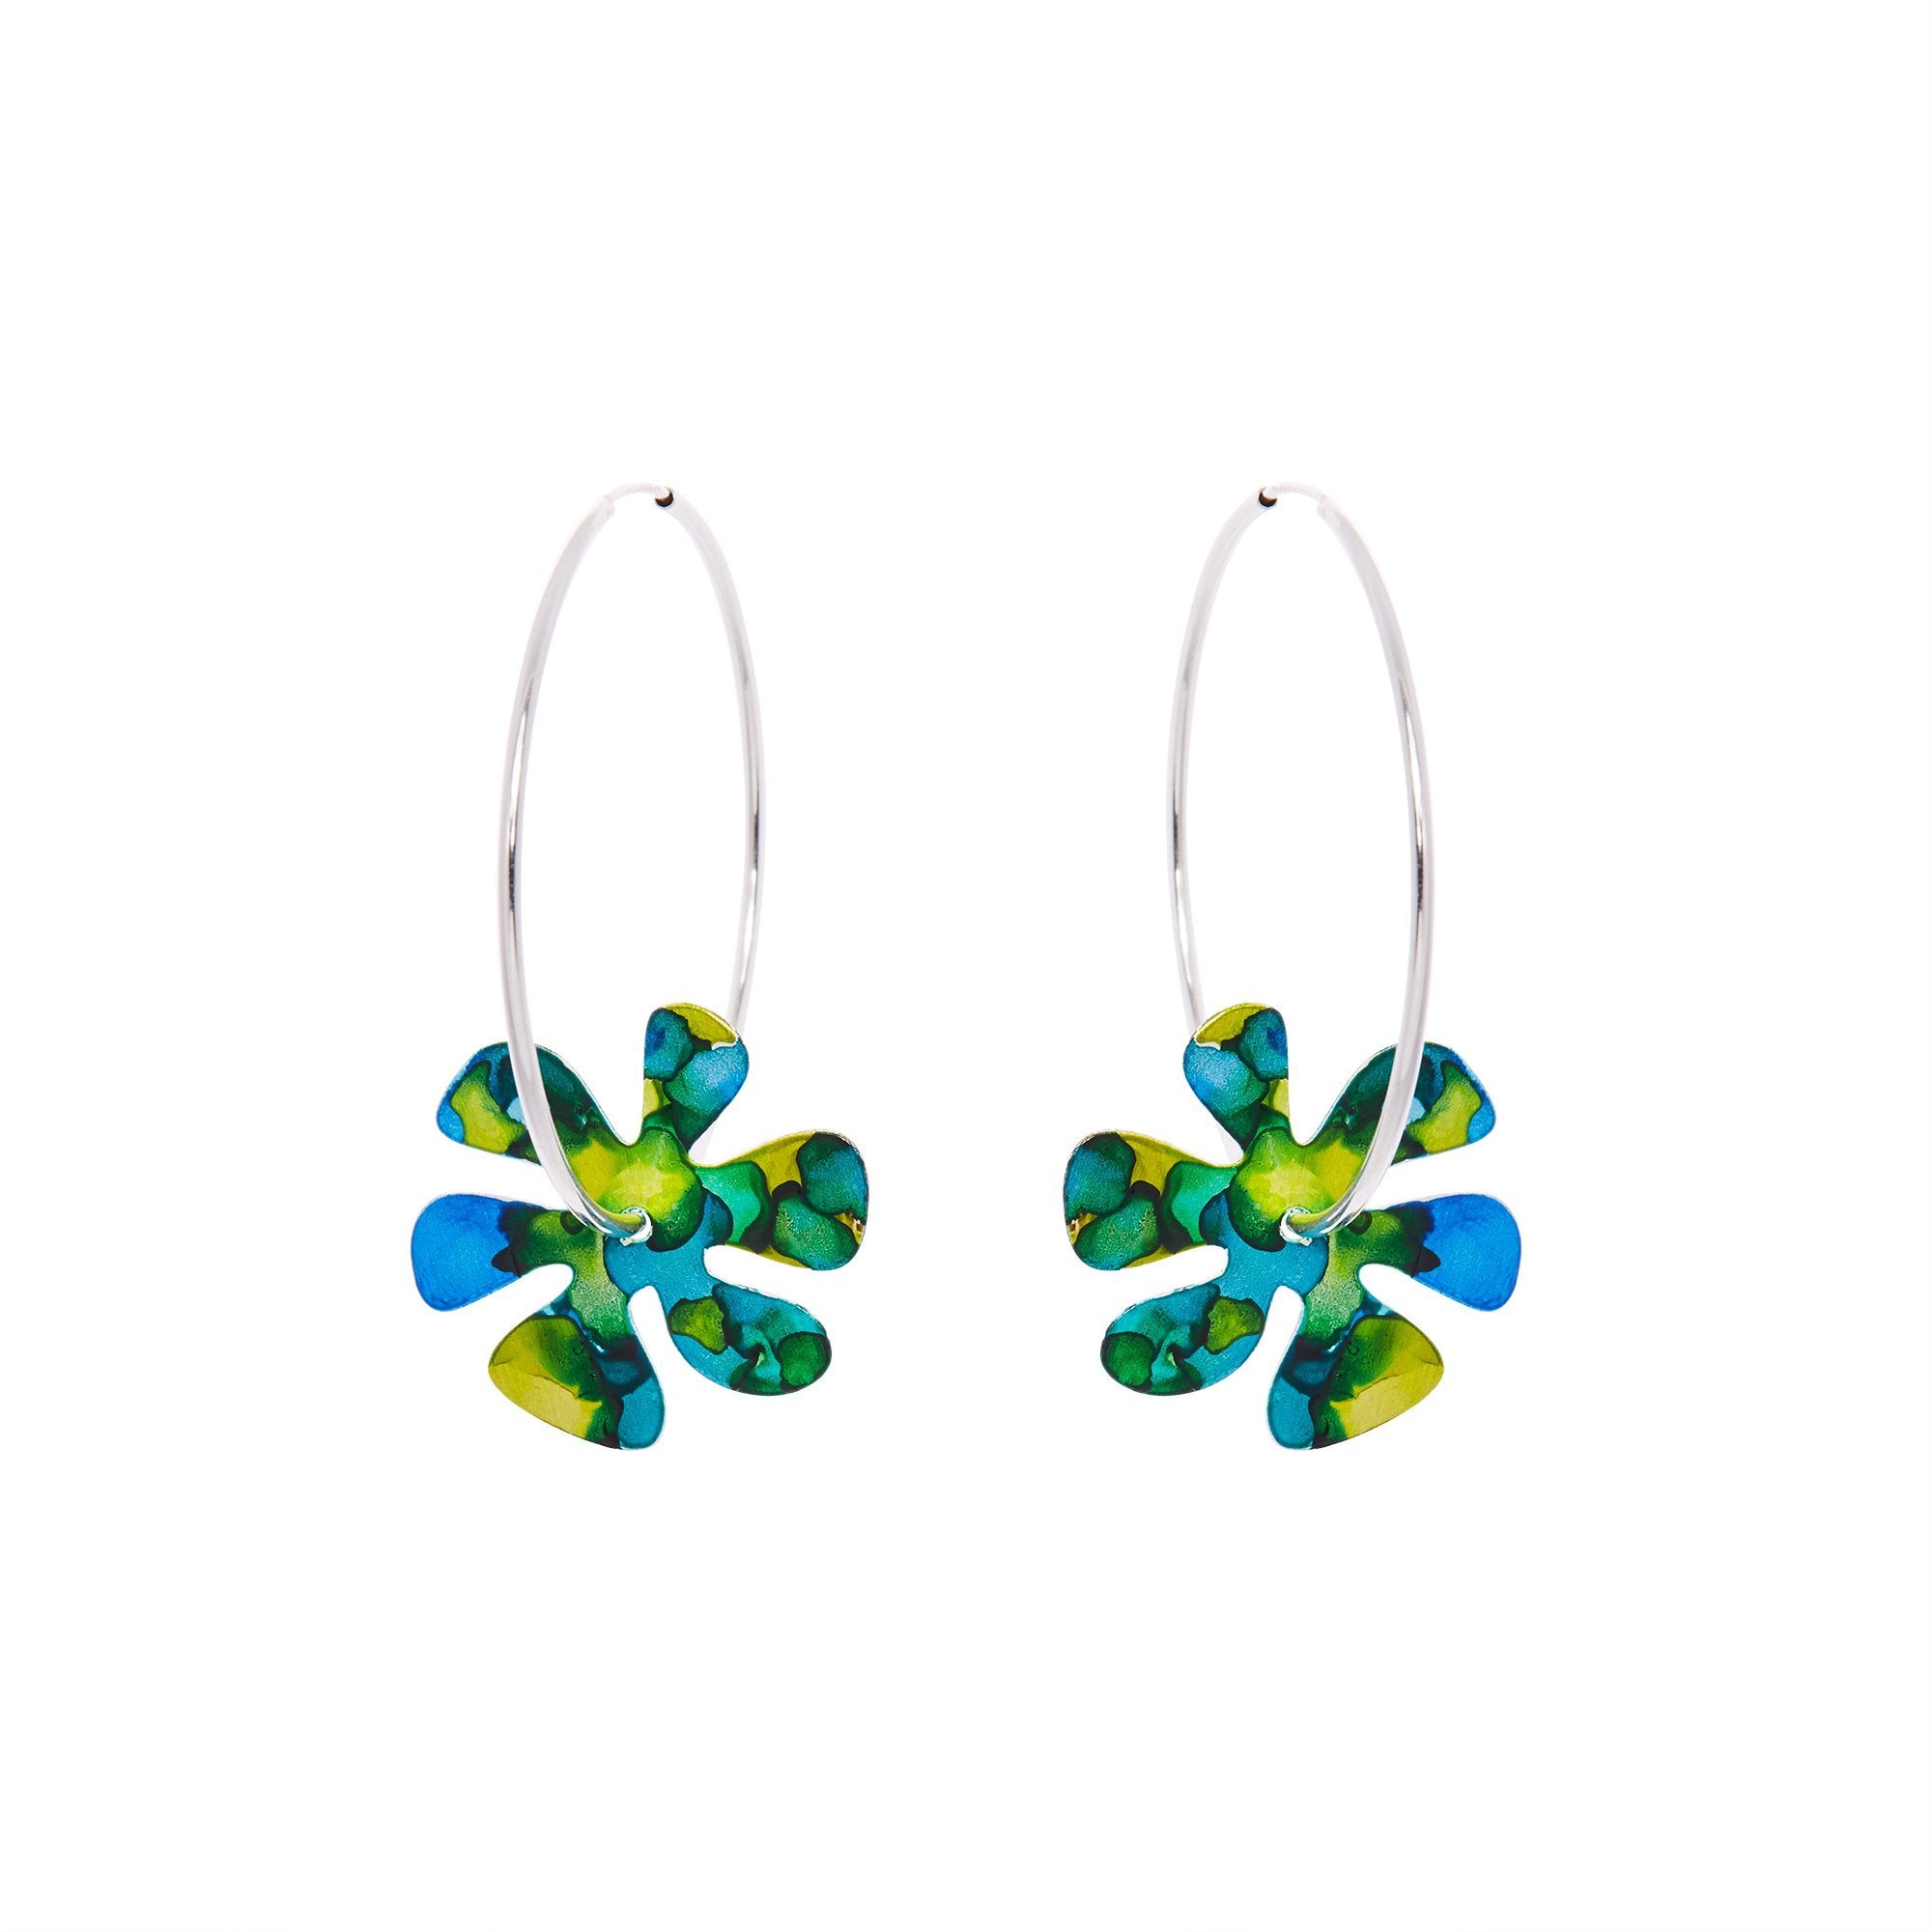 Sterling Silver Flower Power Hoops - Available in More Colors